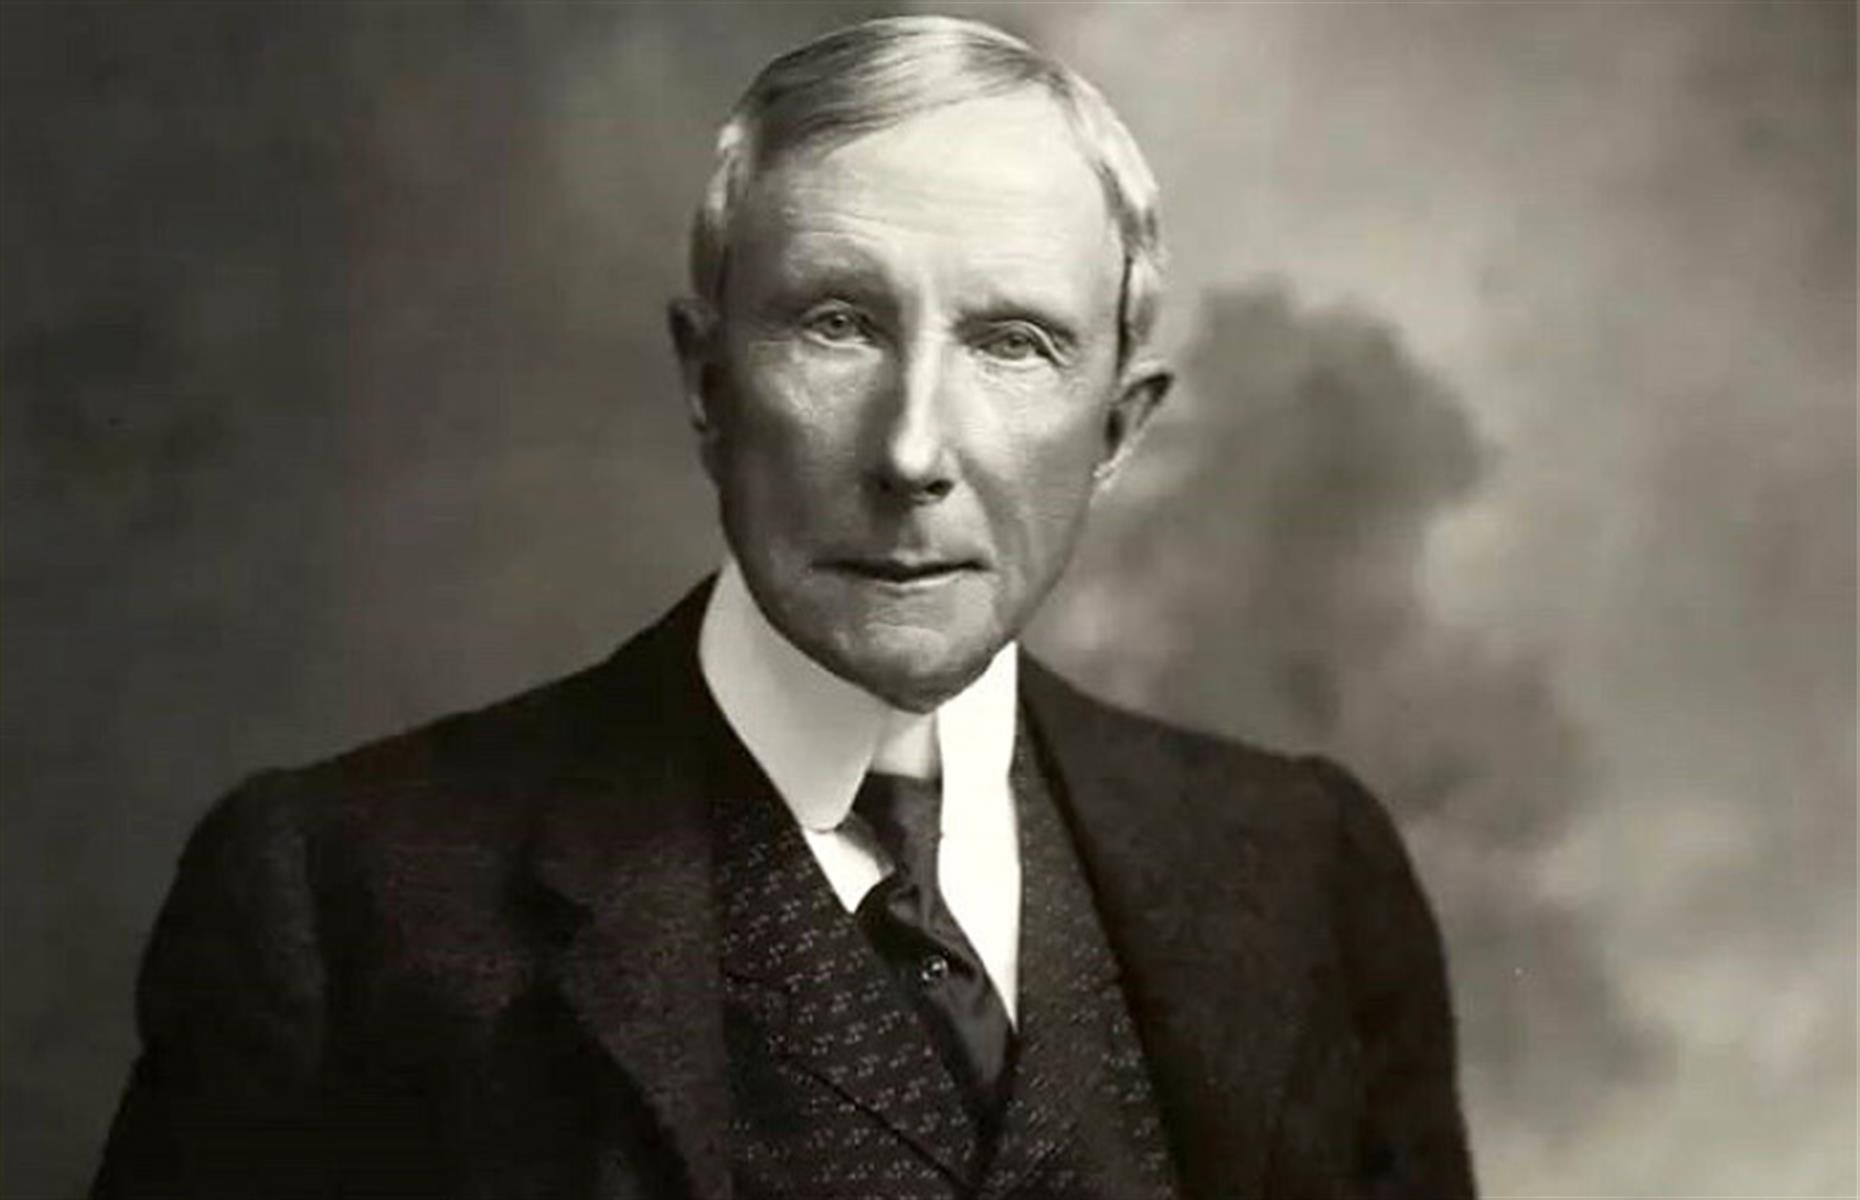 <p>Giving Carnegie a run for his money, so to speak, business magnate John D Rockefeller was also widely considered the wealthiest American of all time. With substantial shares in the Standard Oil Company, which he founded, Rockefeller quickly established a monopoly on the industry, revolutionising the petroleum trade in America.</p>  <p>As the importance of kerosene and gasoline skyrocketed with the spread of electricity and the invention of the automobile, Rockefeller rose to become America’s first billionaire, with a peak net worth of approximately $28 billion (£22bn) in today’s money.</p>